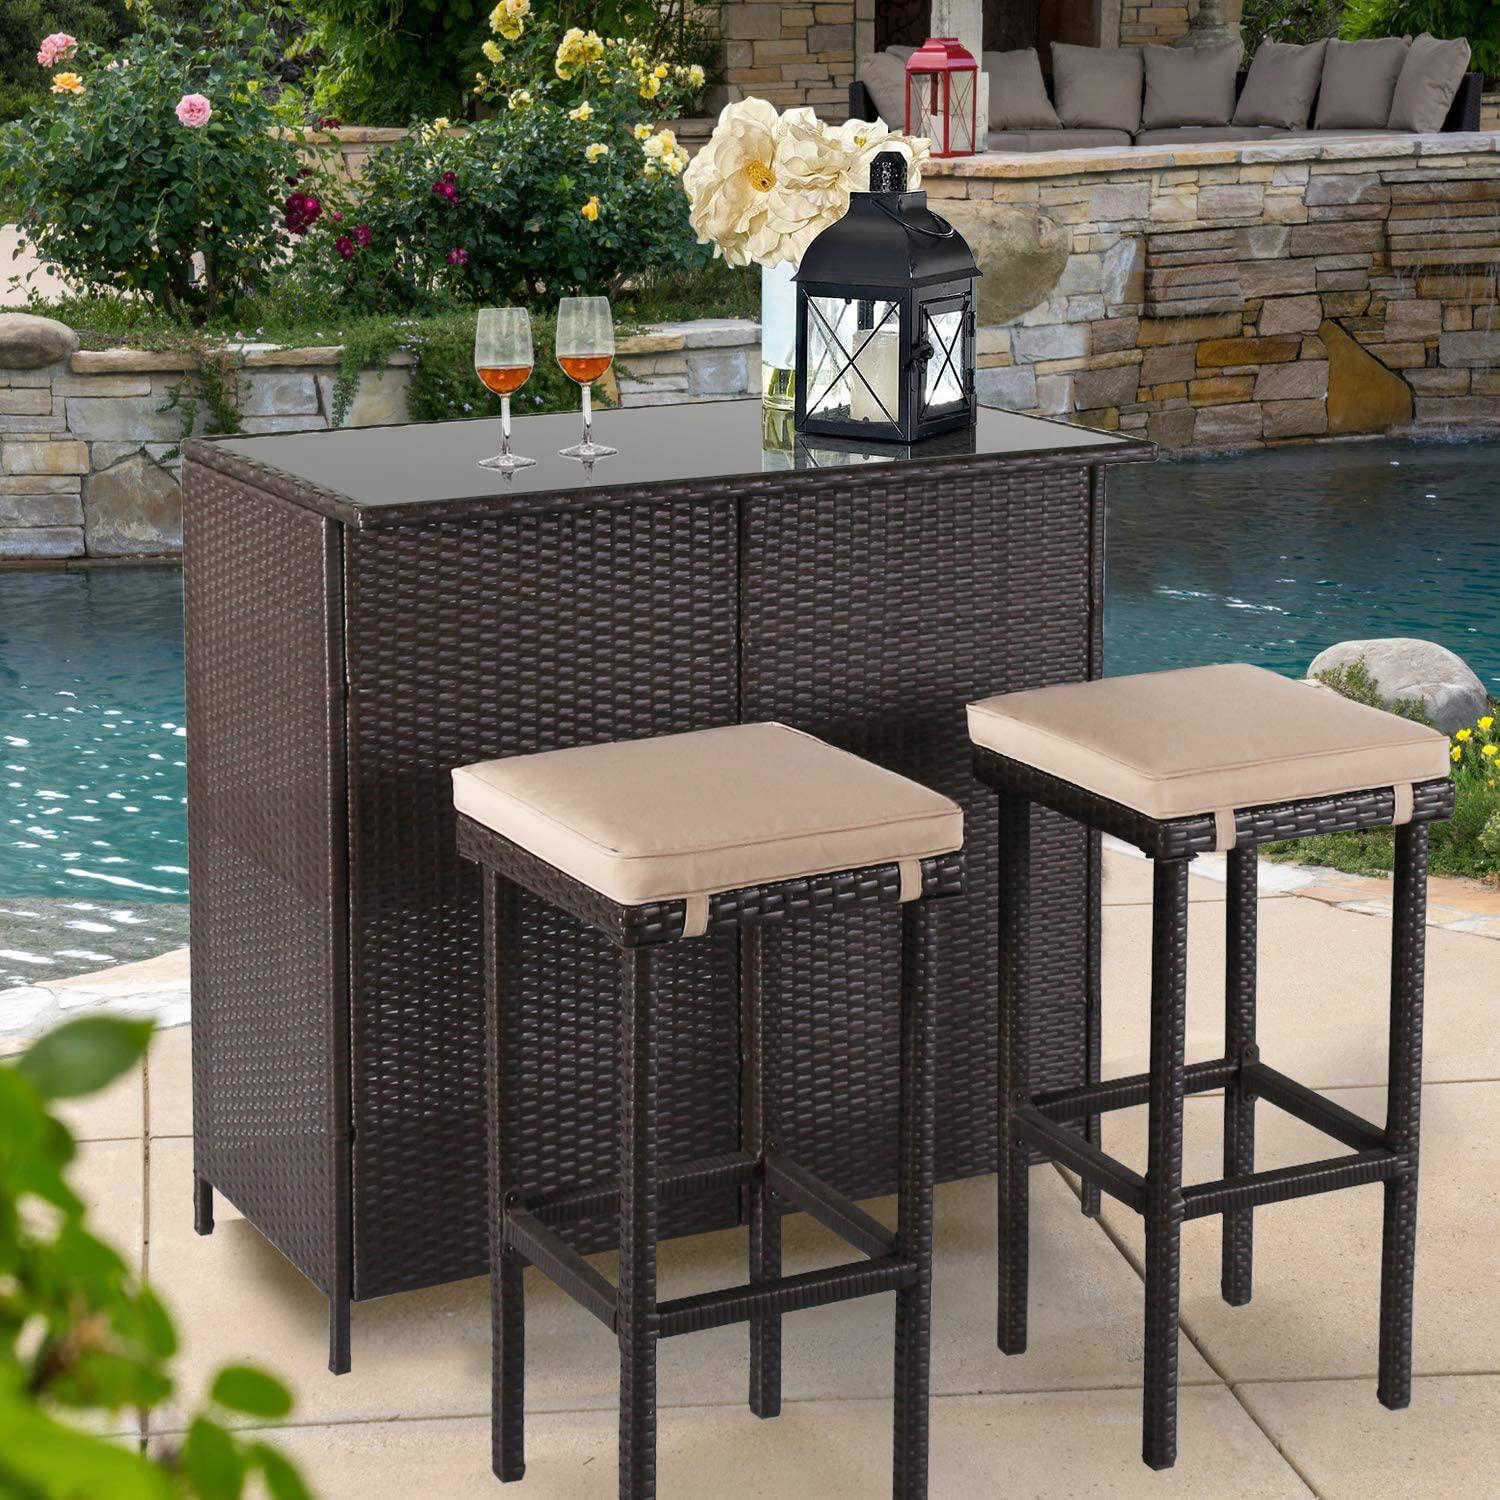 omelaza 3-piece patio bar table set outdoor wicker bistro set - glass bar and two stools with cushions for patios, backyards,